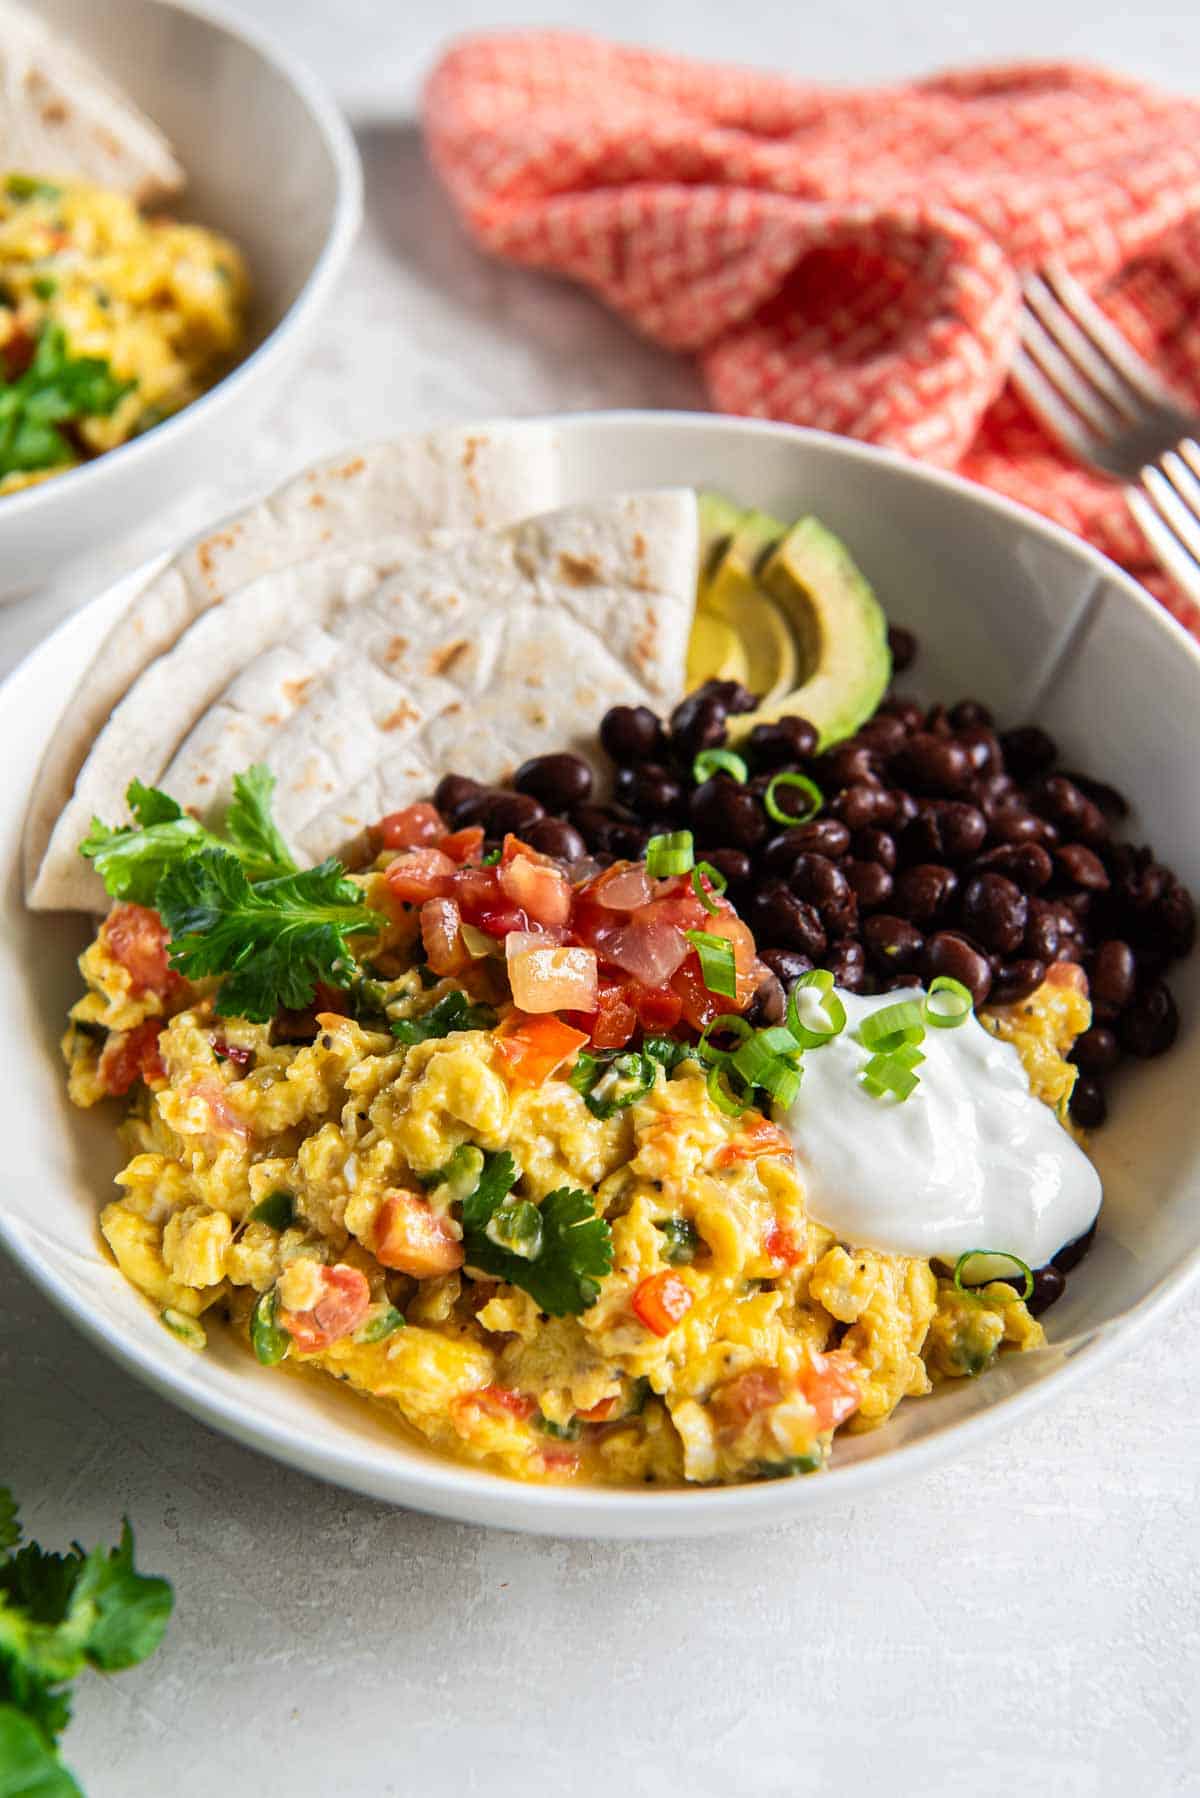 Mexican scrambled eggs in a white bowl with black beans, salsa, and a folded flour tortilla.